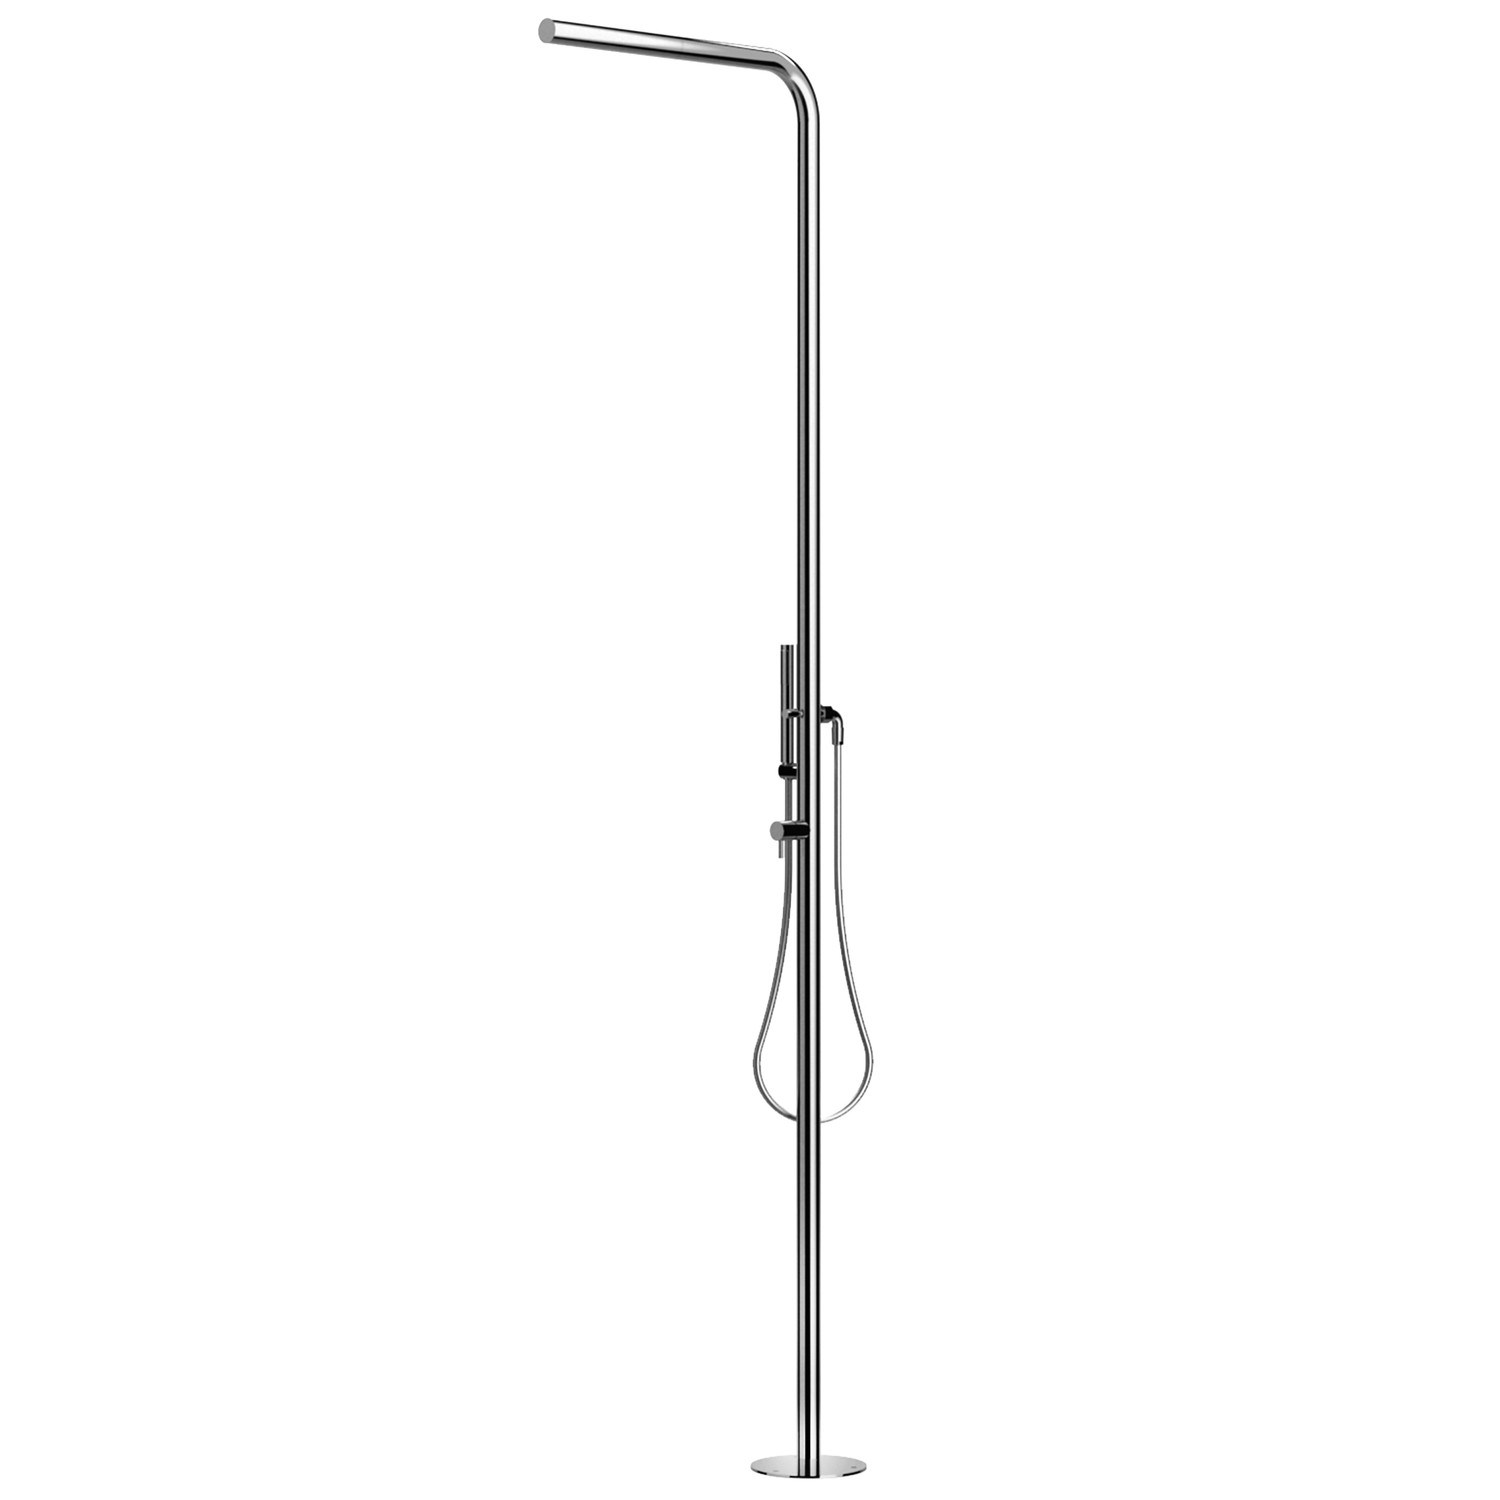 Skinny S40 316 Marine Grade Stainless Steel Free Standing Hot and Cold Shower Column with Hand Spray